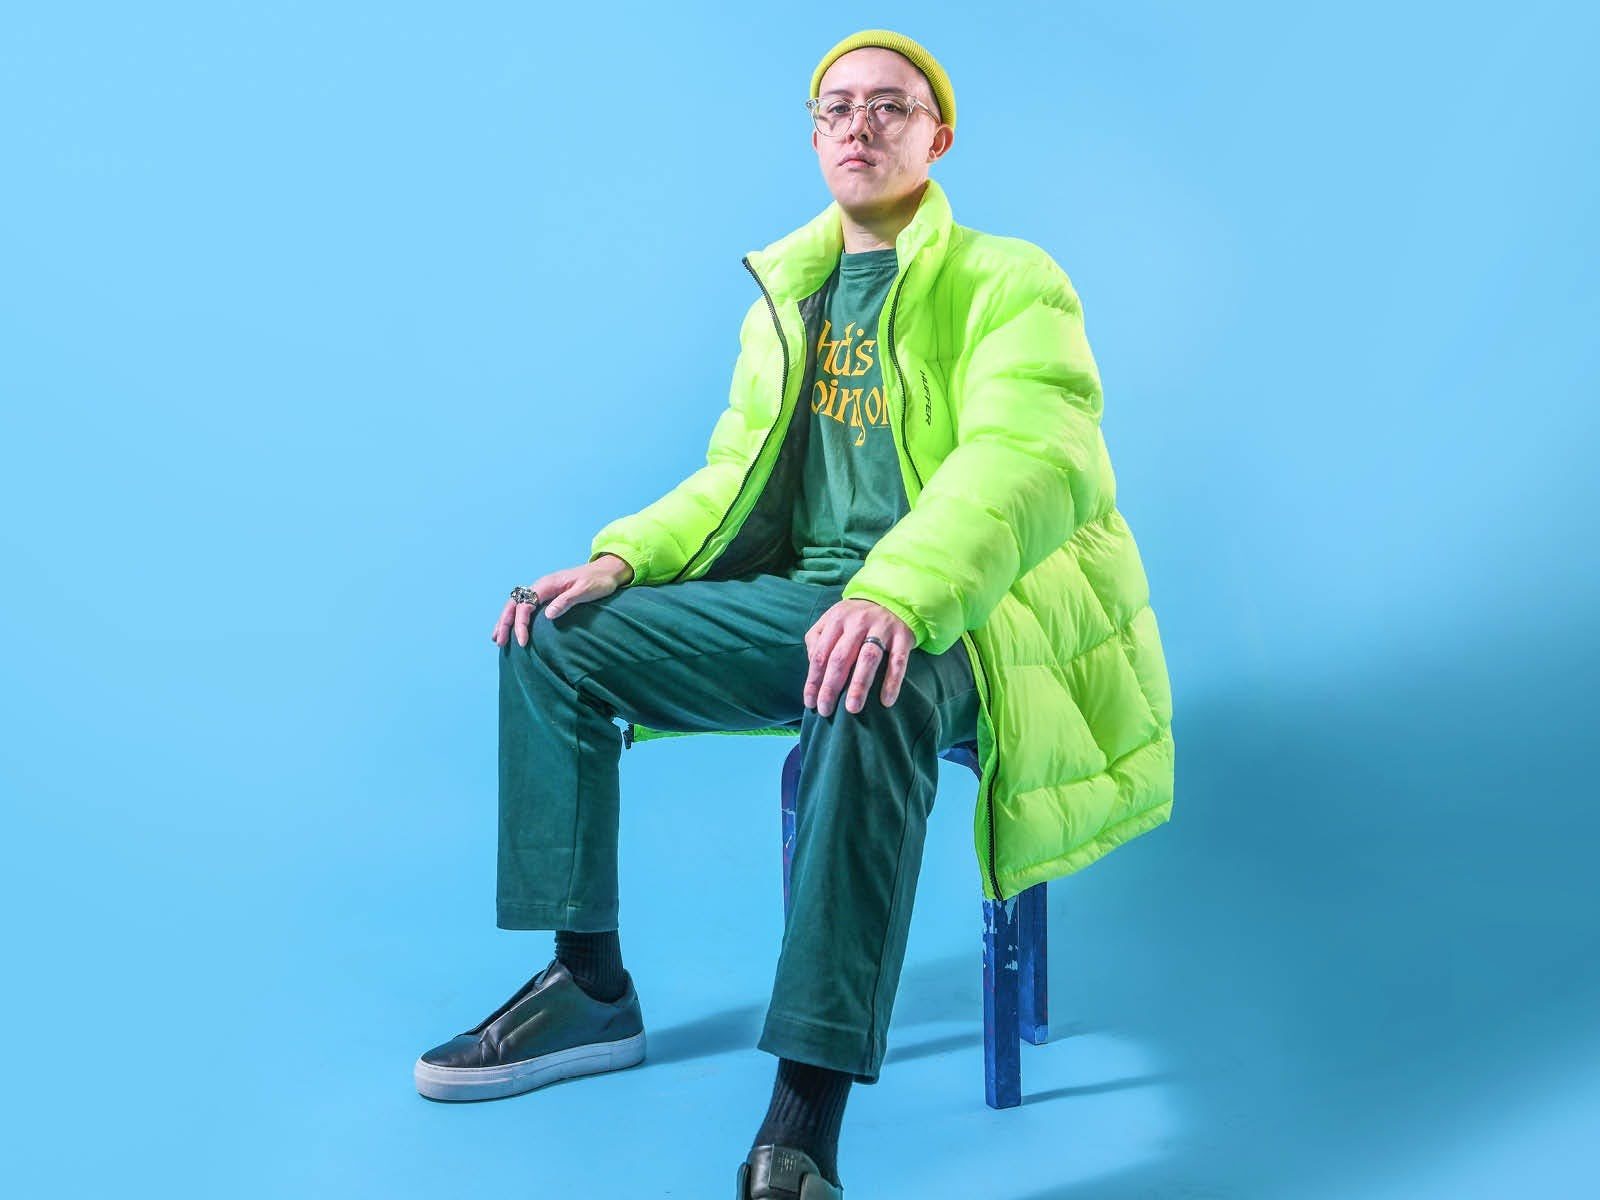 Billy Davis in a green outfit sitting down in front of a blue background